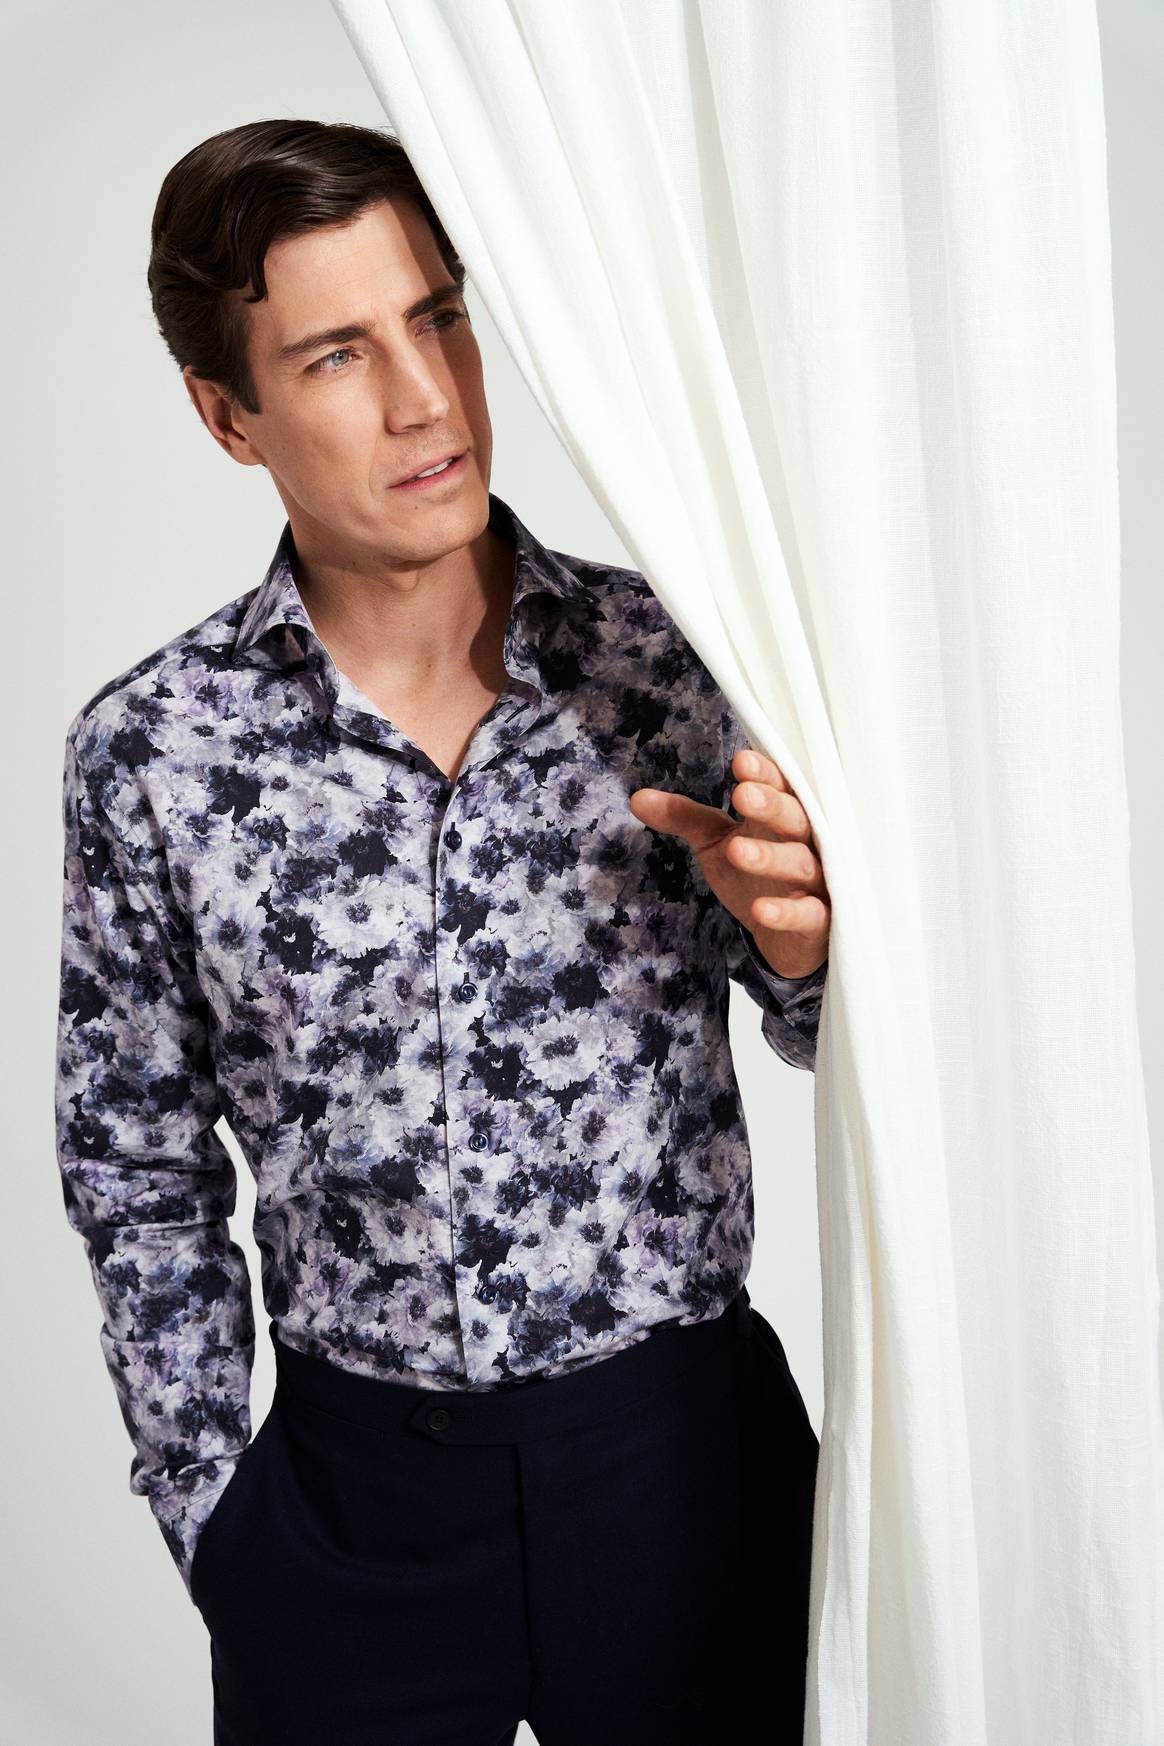 ETON, Holiday 22 Collection, courtesy of the brand